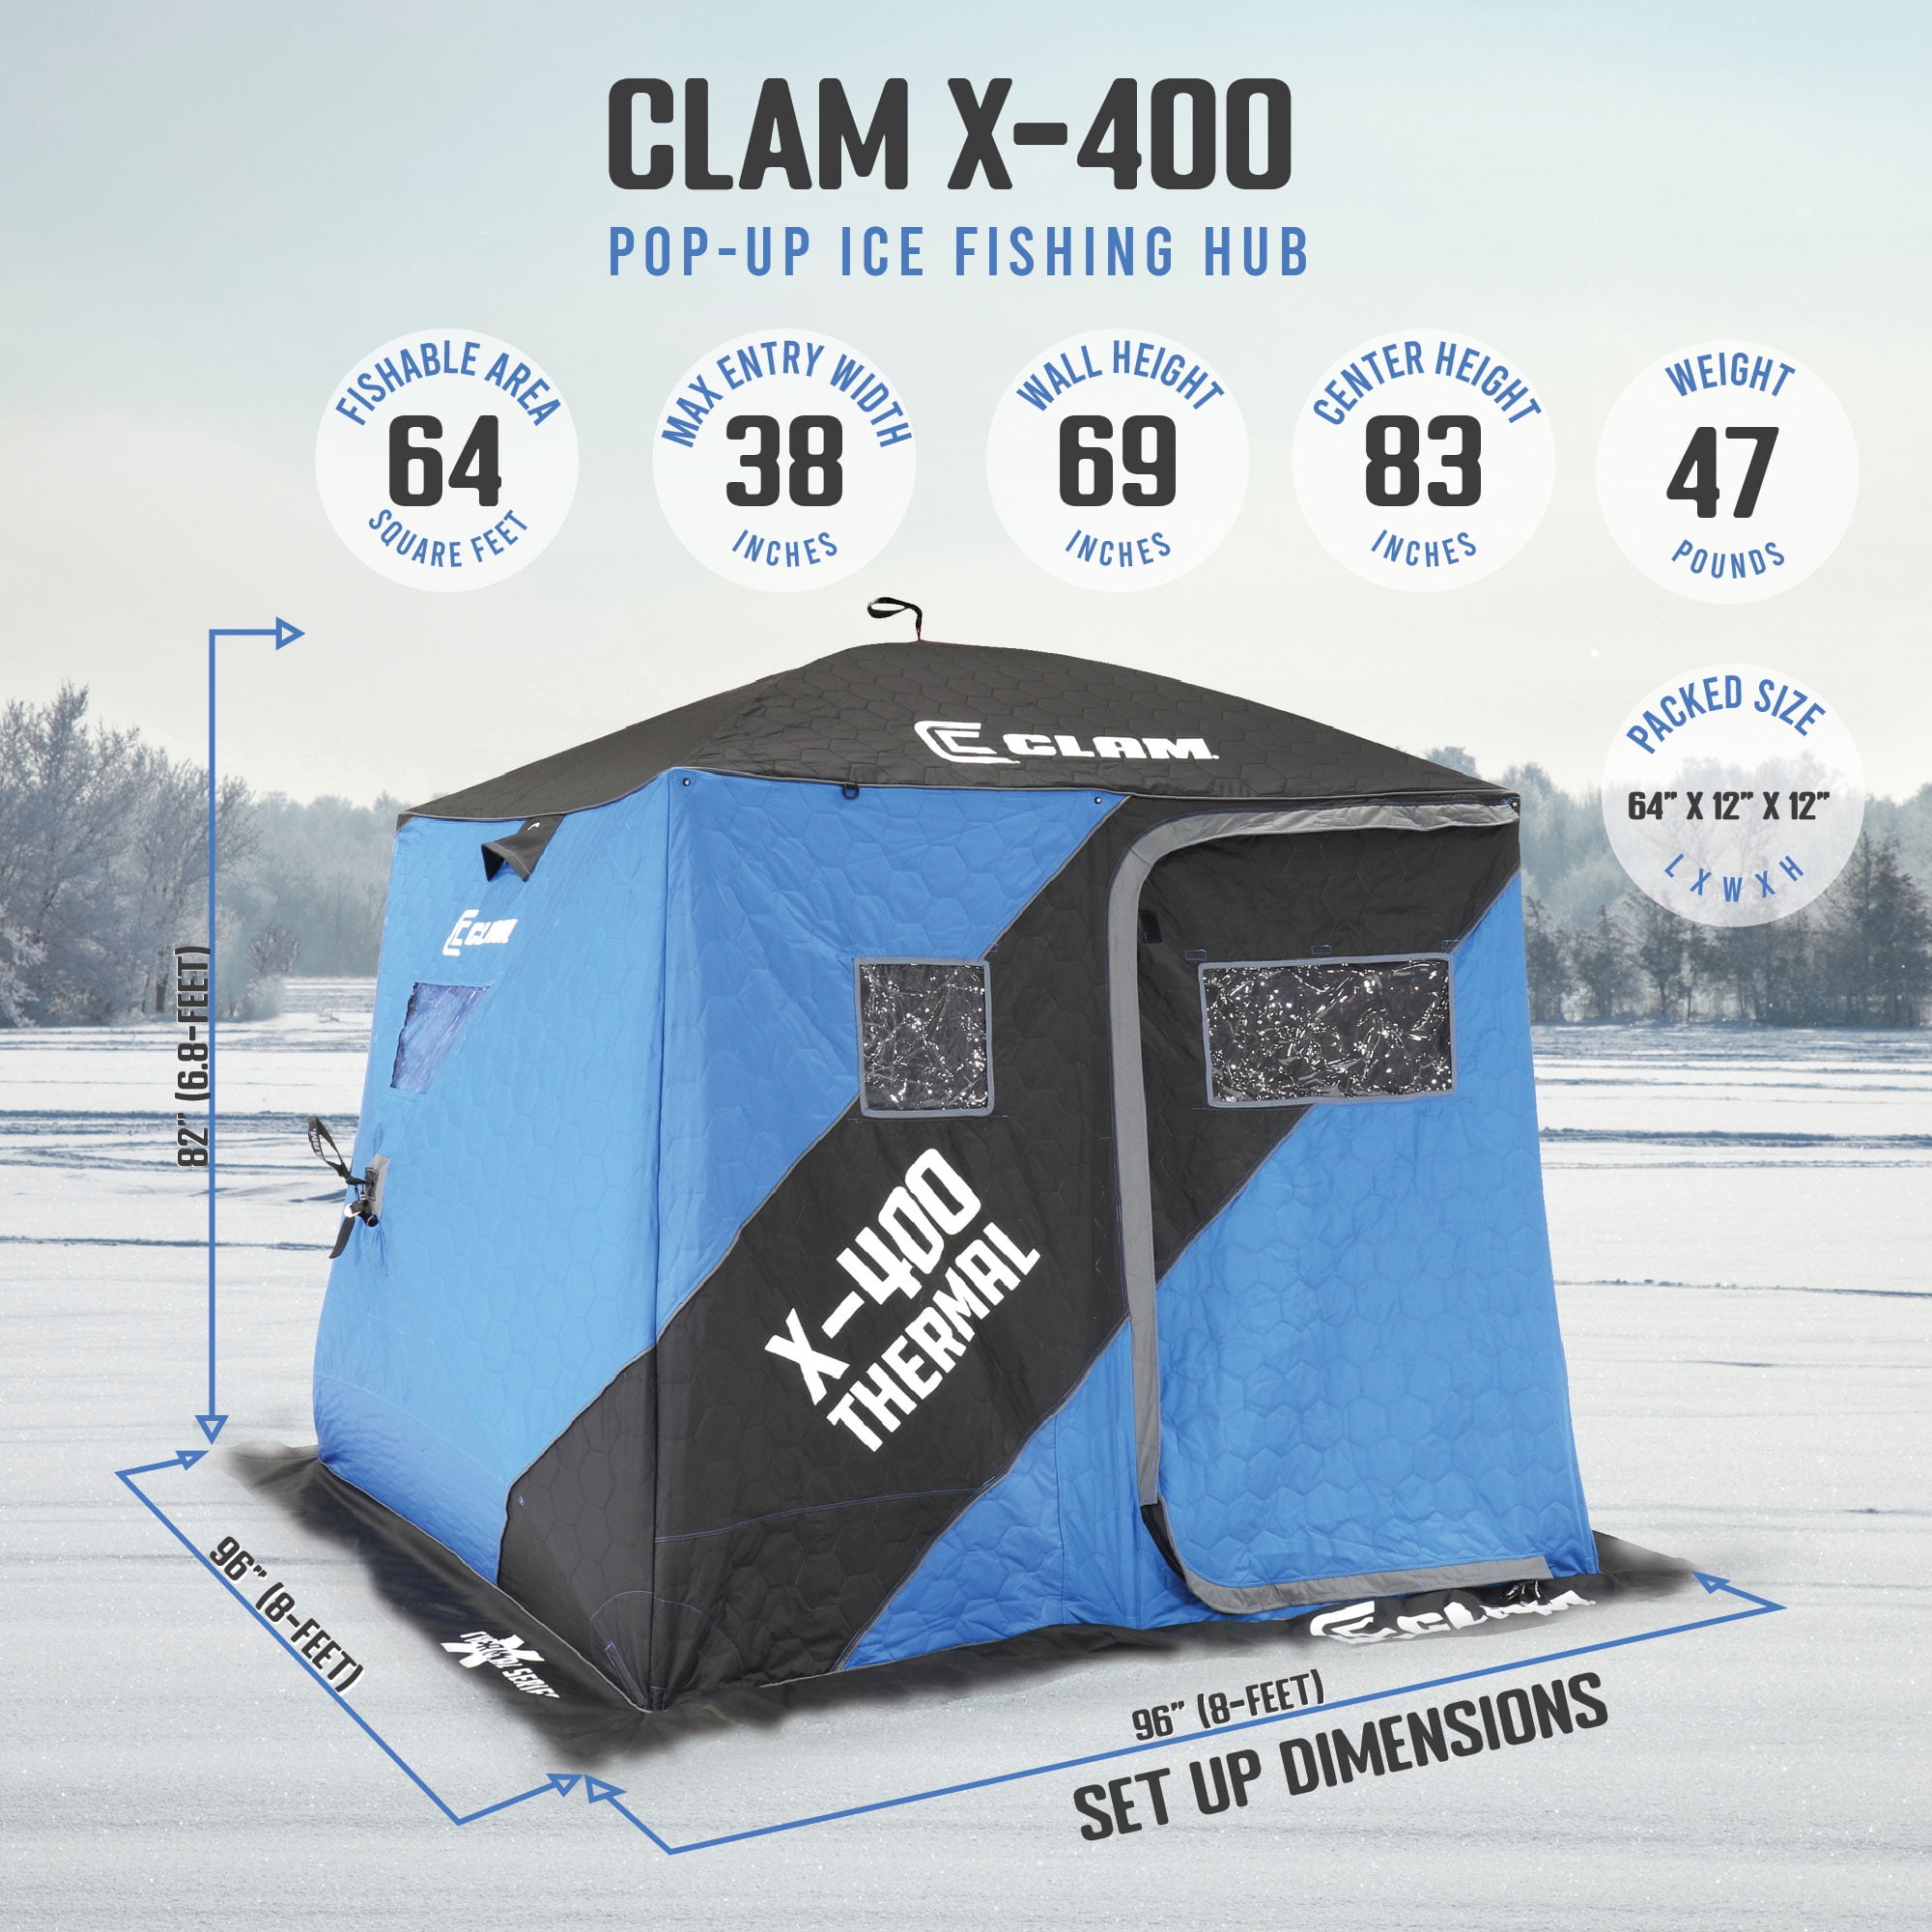 CLAM X-400 Portable 4 Person 8' Pop Up Ice Fishing Thermal Hub